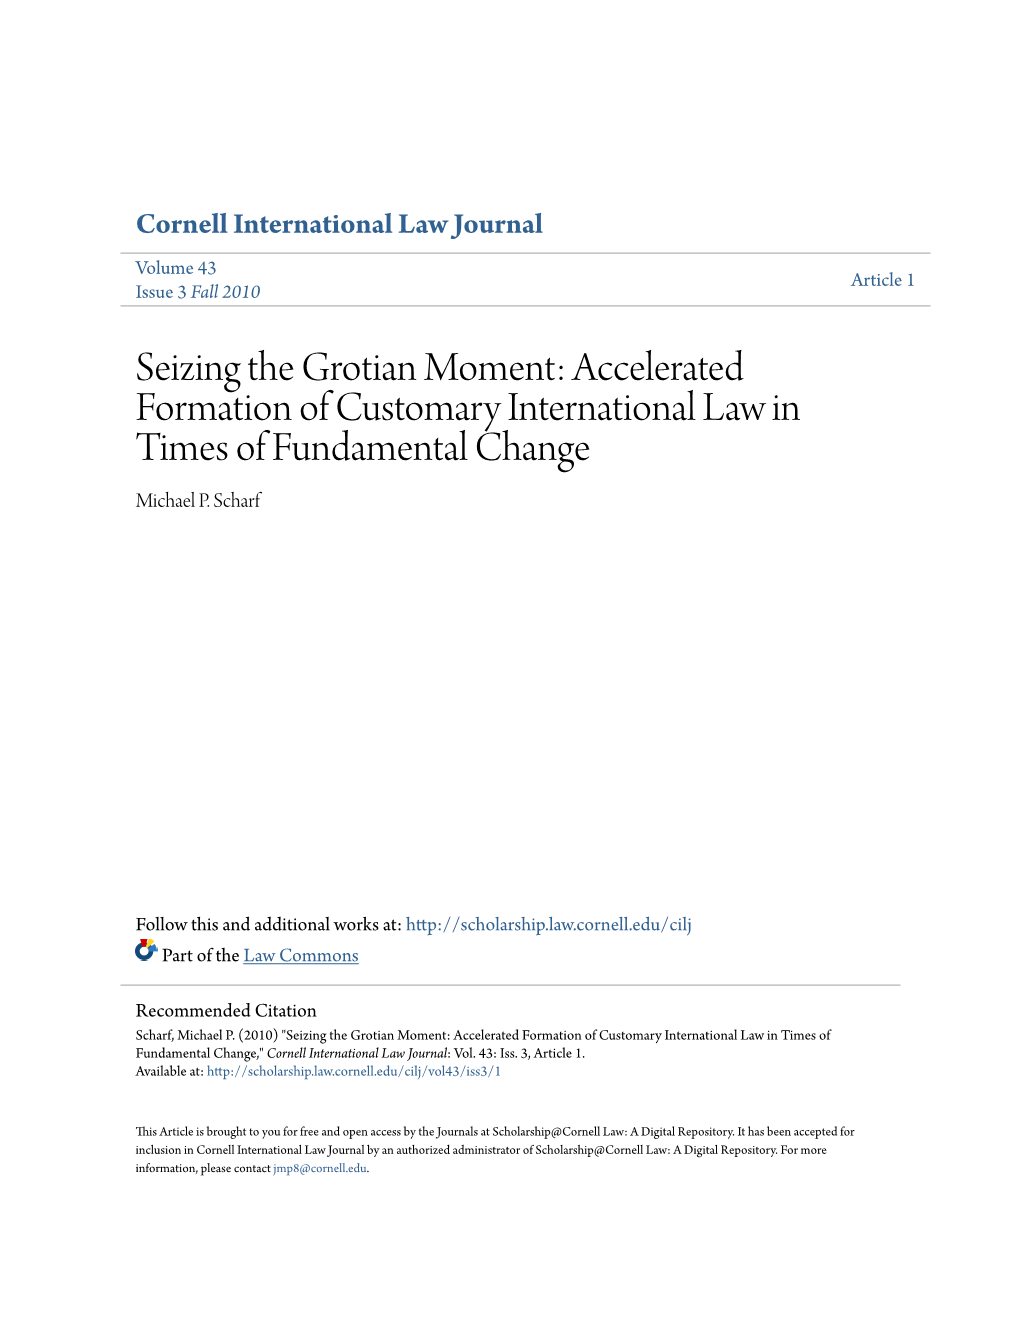 Accelerated Formation of Customary International Law in Times of Fundamental Change Michael P